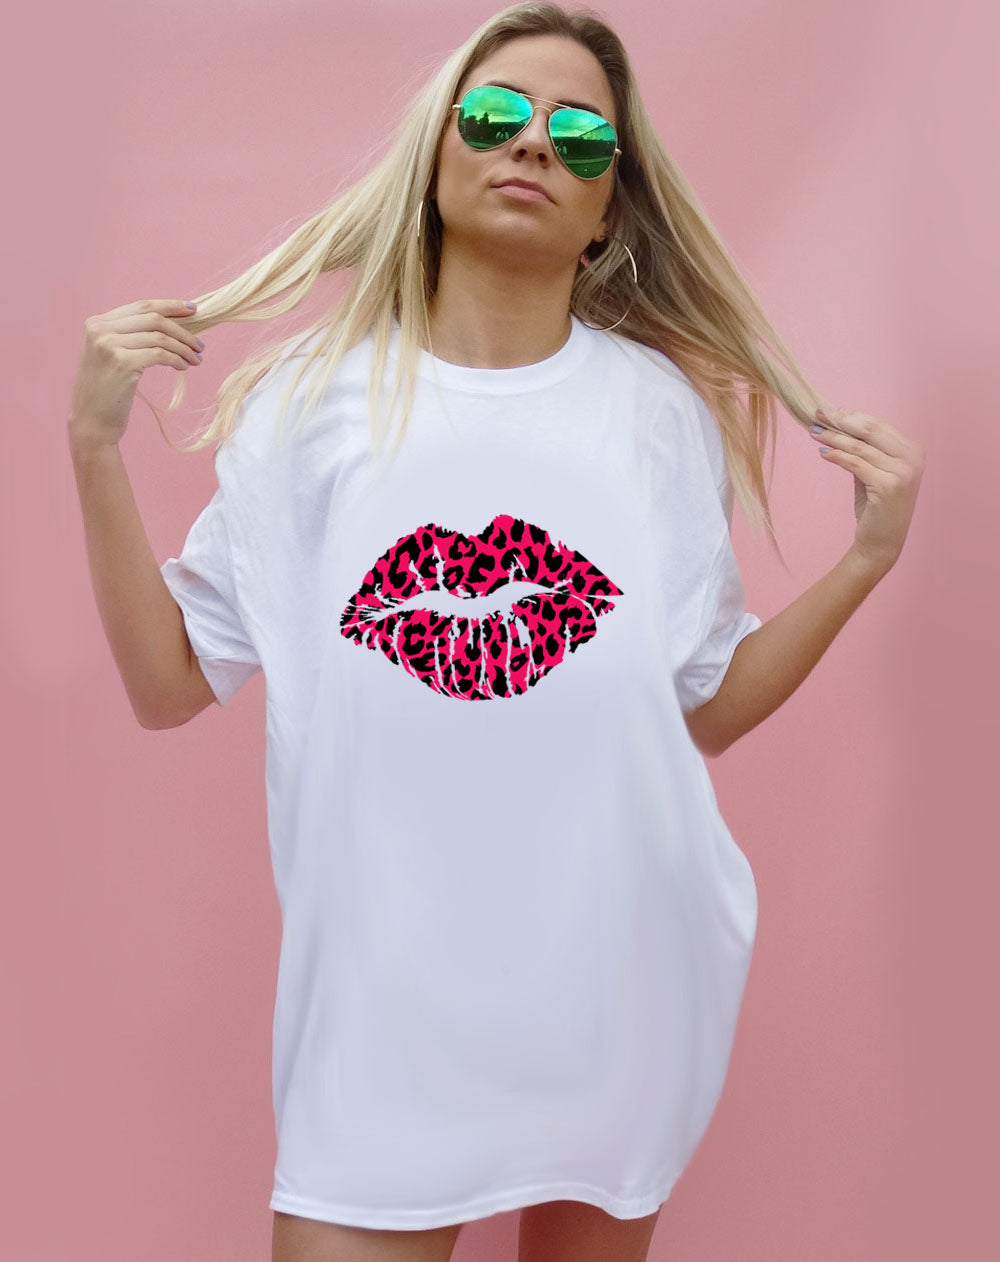 Hot Pink and Black Leopard Lip Motif Tshirt Top In White